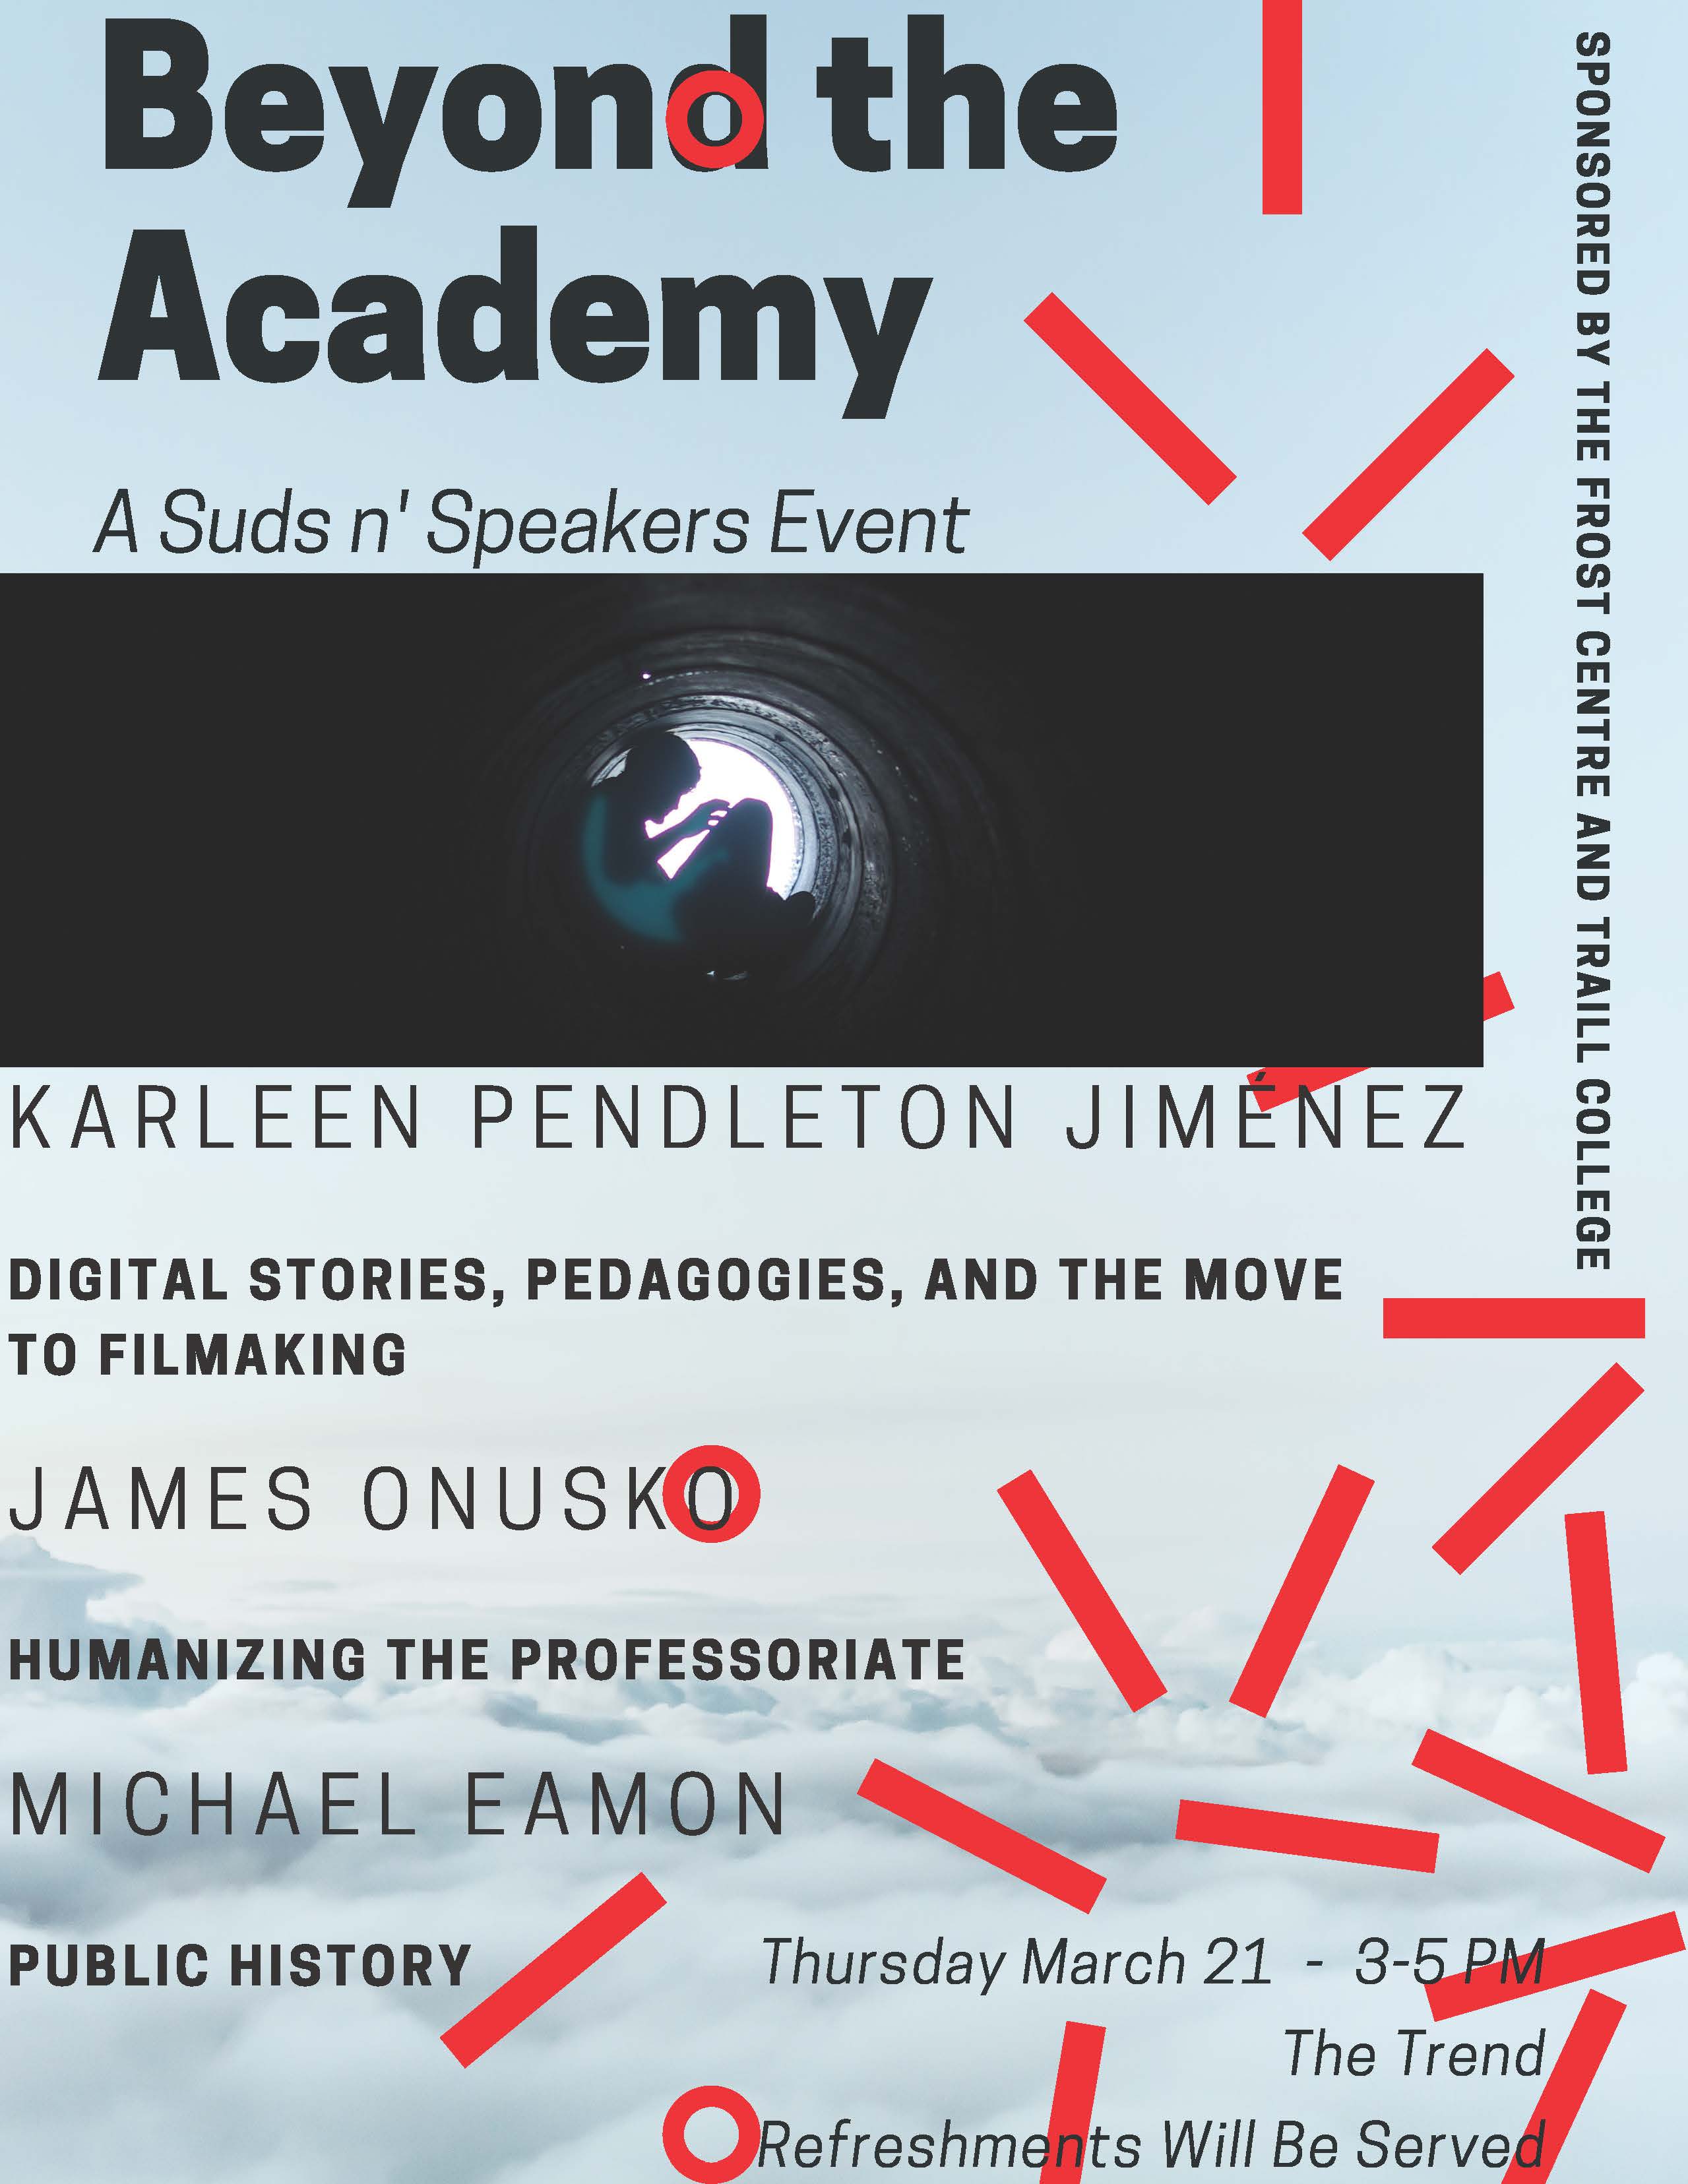 "Beyond the Academy" A Suds n' Speakers Event April 2019